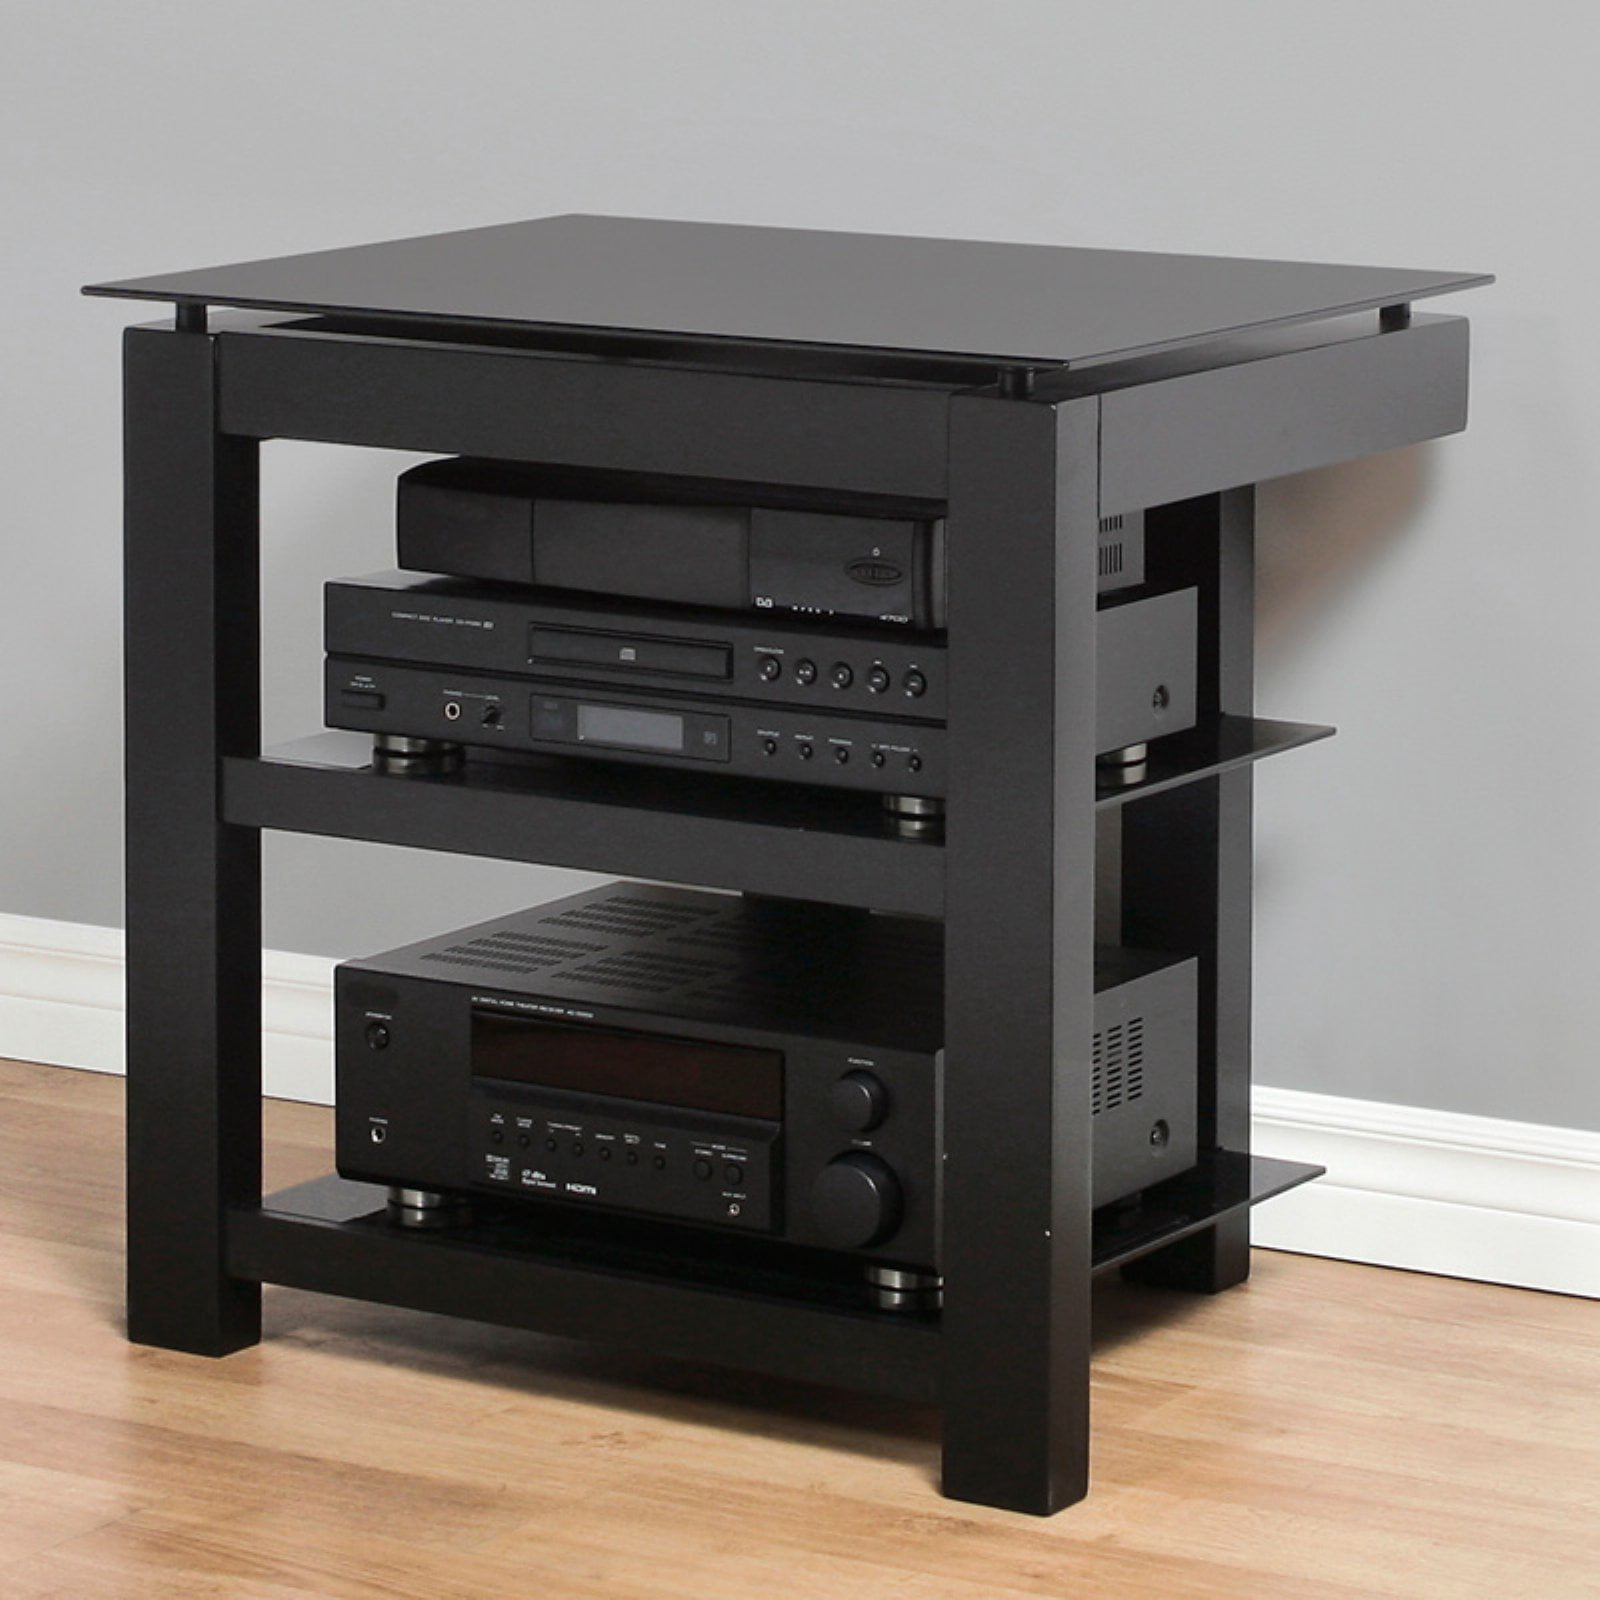 26 Inch Flat Screen Low Profile Tv Stand Black Glass And Black Satin